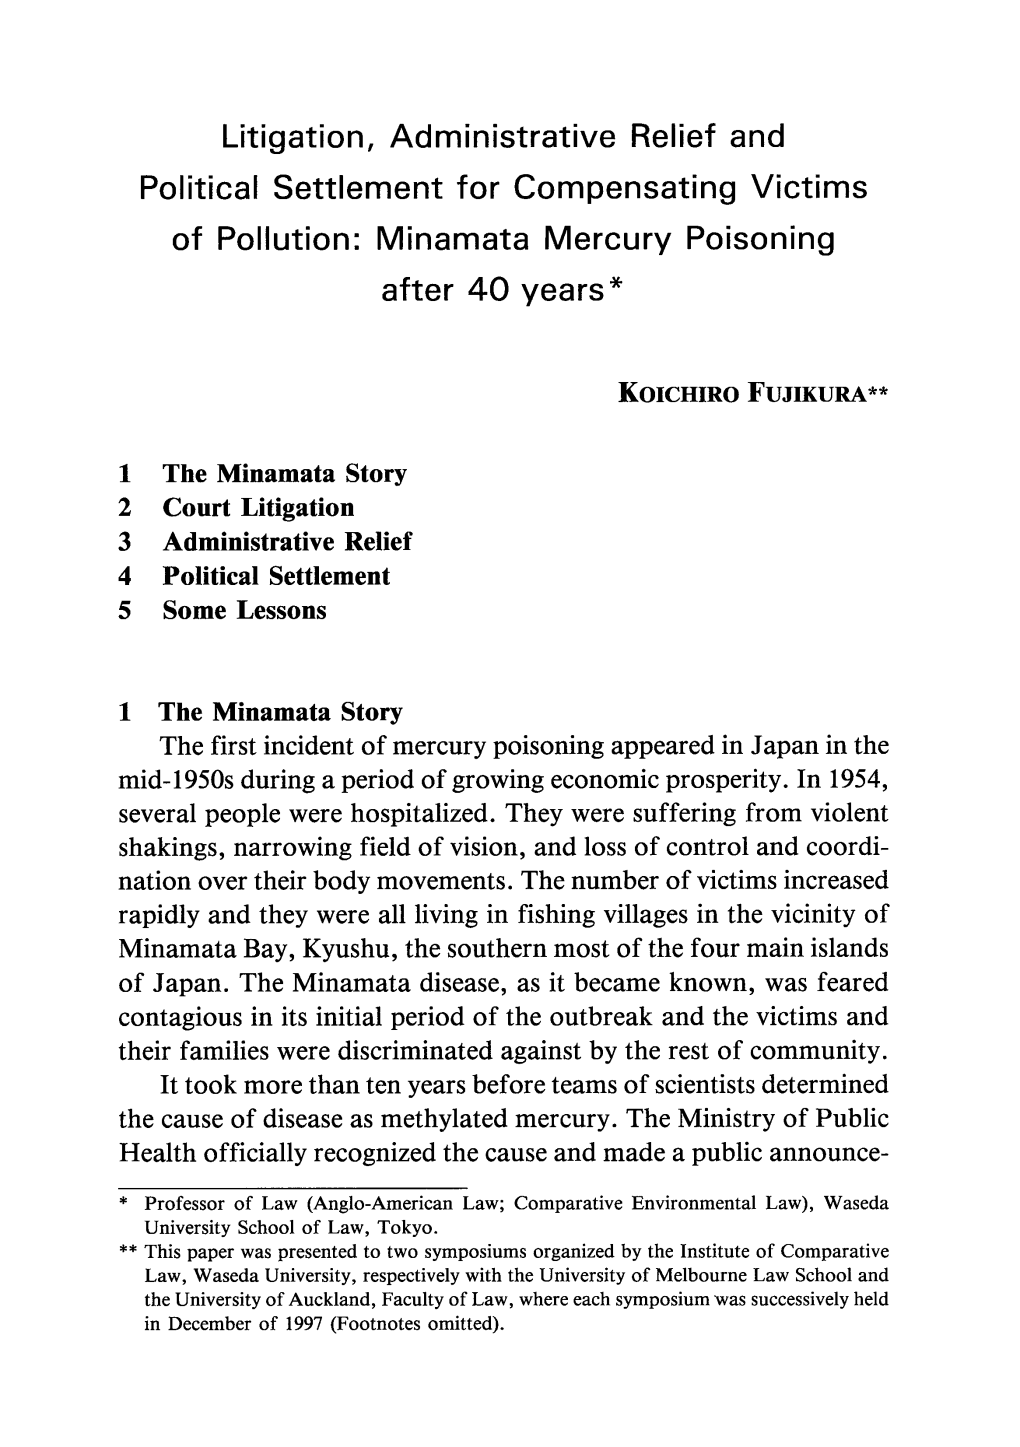 Of Pollution: Minamata Mercury Poisoning After 40 Years*